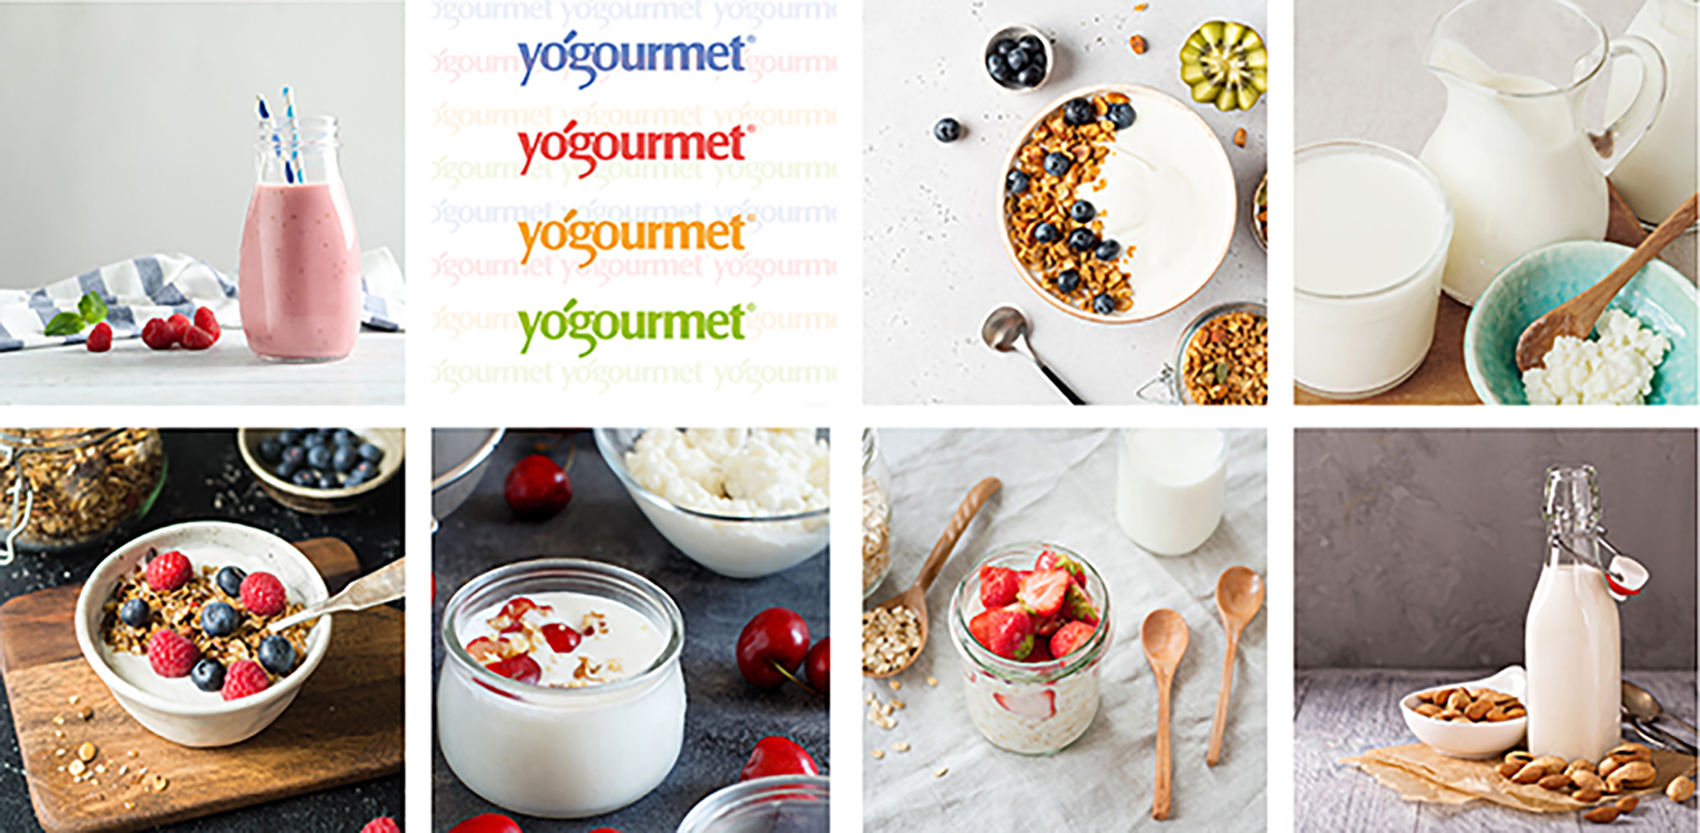 Yogourmet brand and our mission